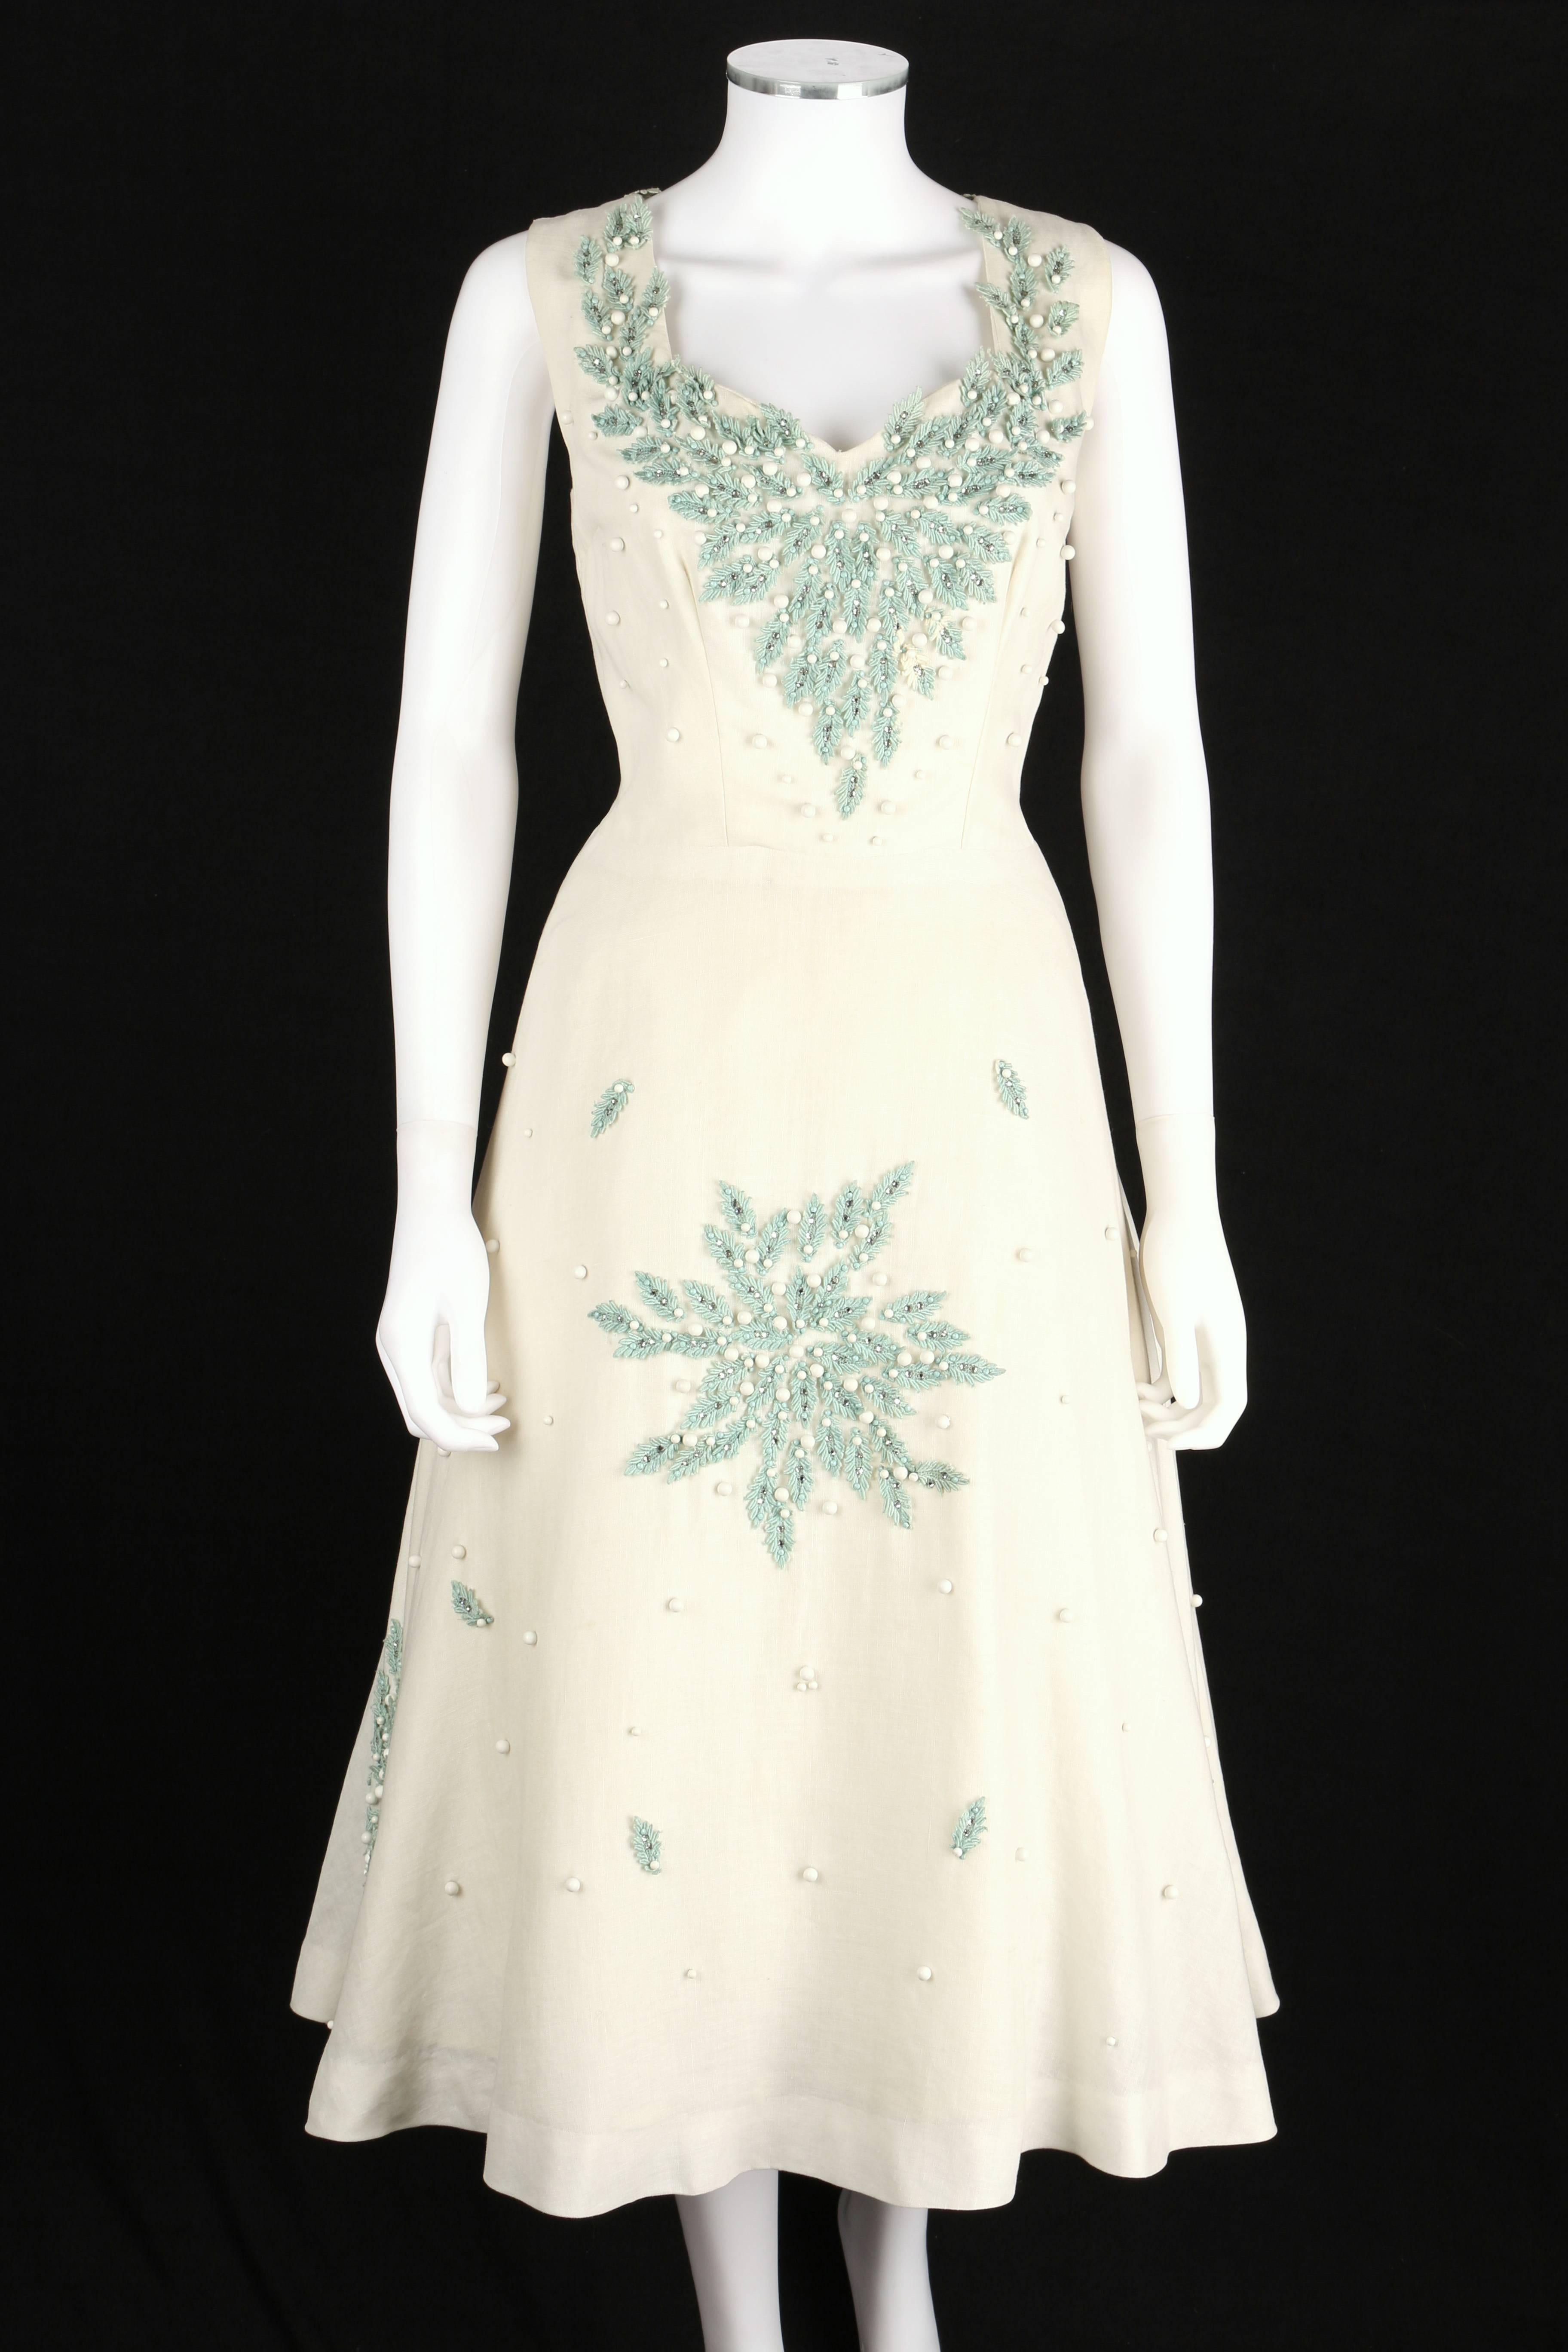 Vintage c.1950s Milton Saunders Original white/ivory linen tea length party dress. Sweetheart neckline front and back. Embellished throughout with turquoise applique leaves, white and turquoise studs and rhinestones. Closes at side with metal